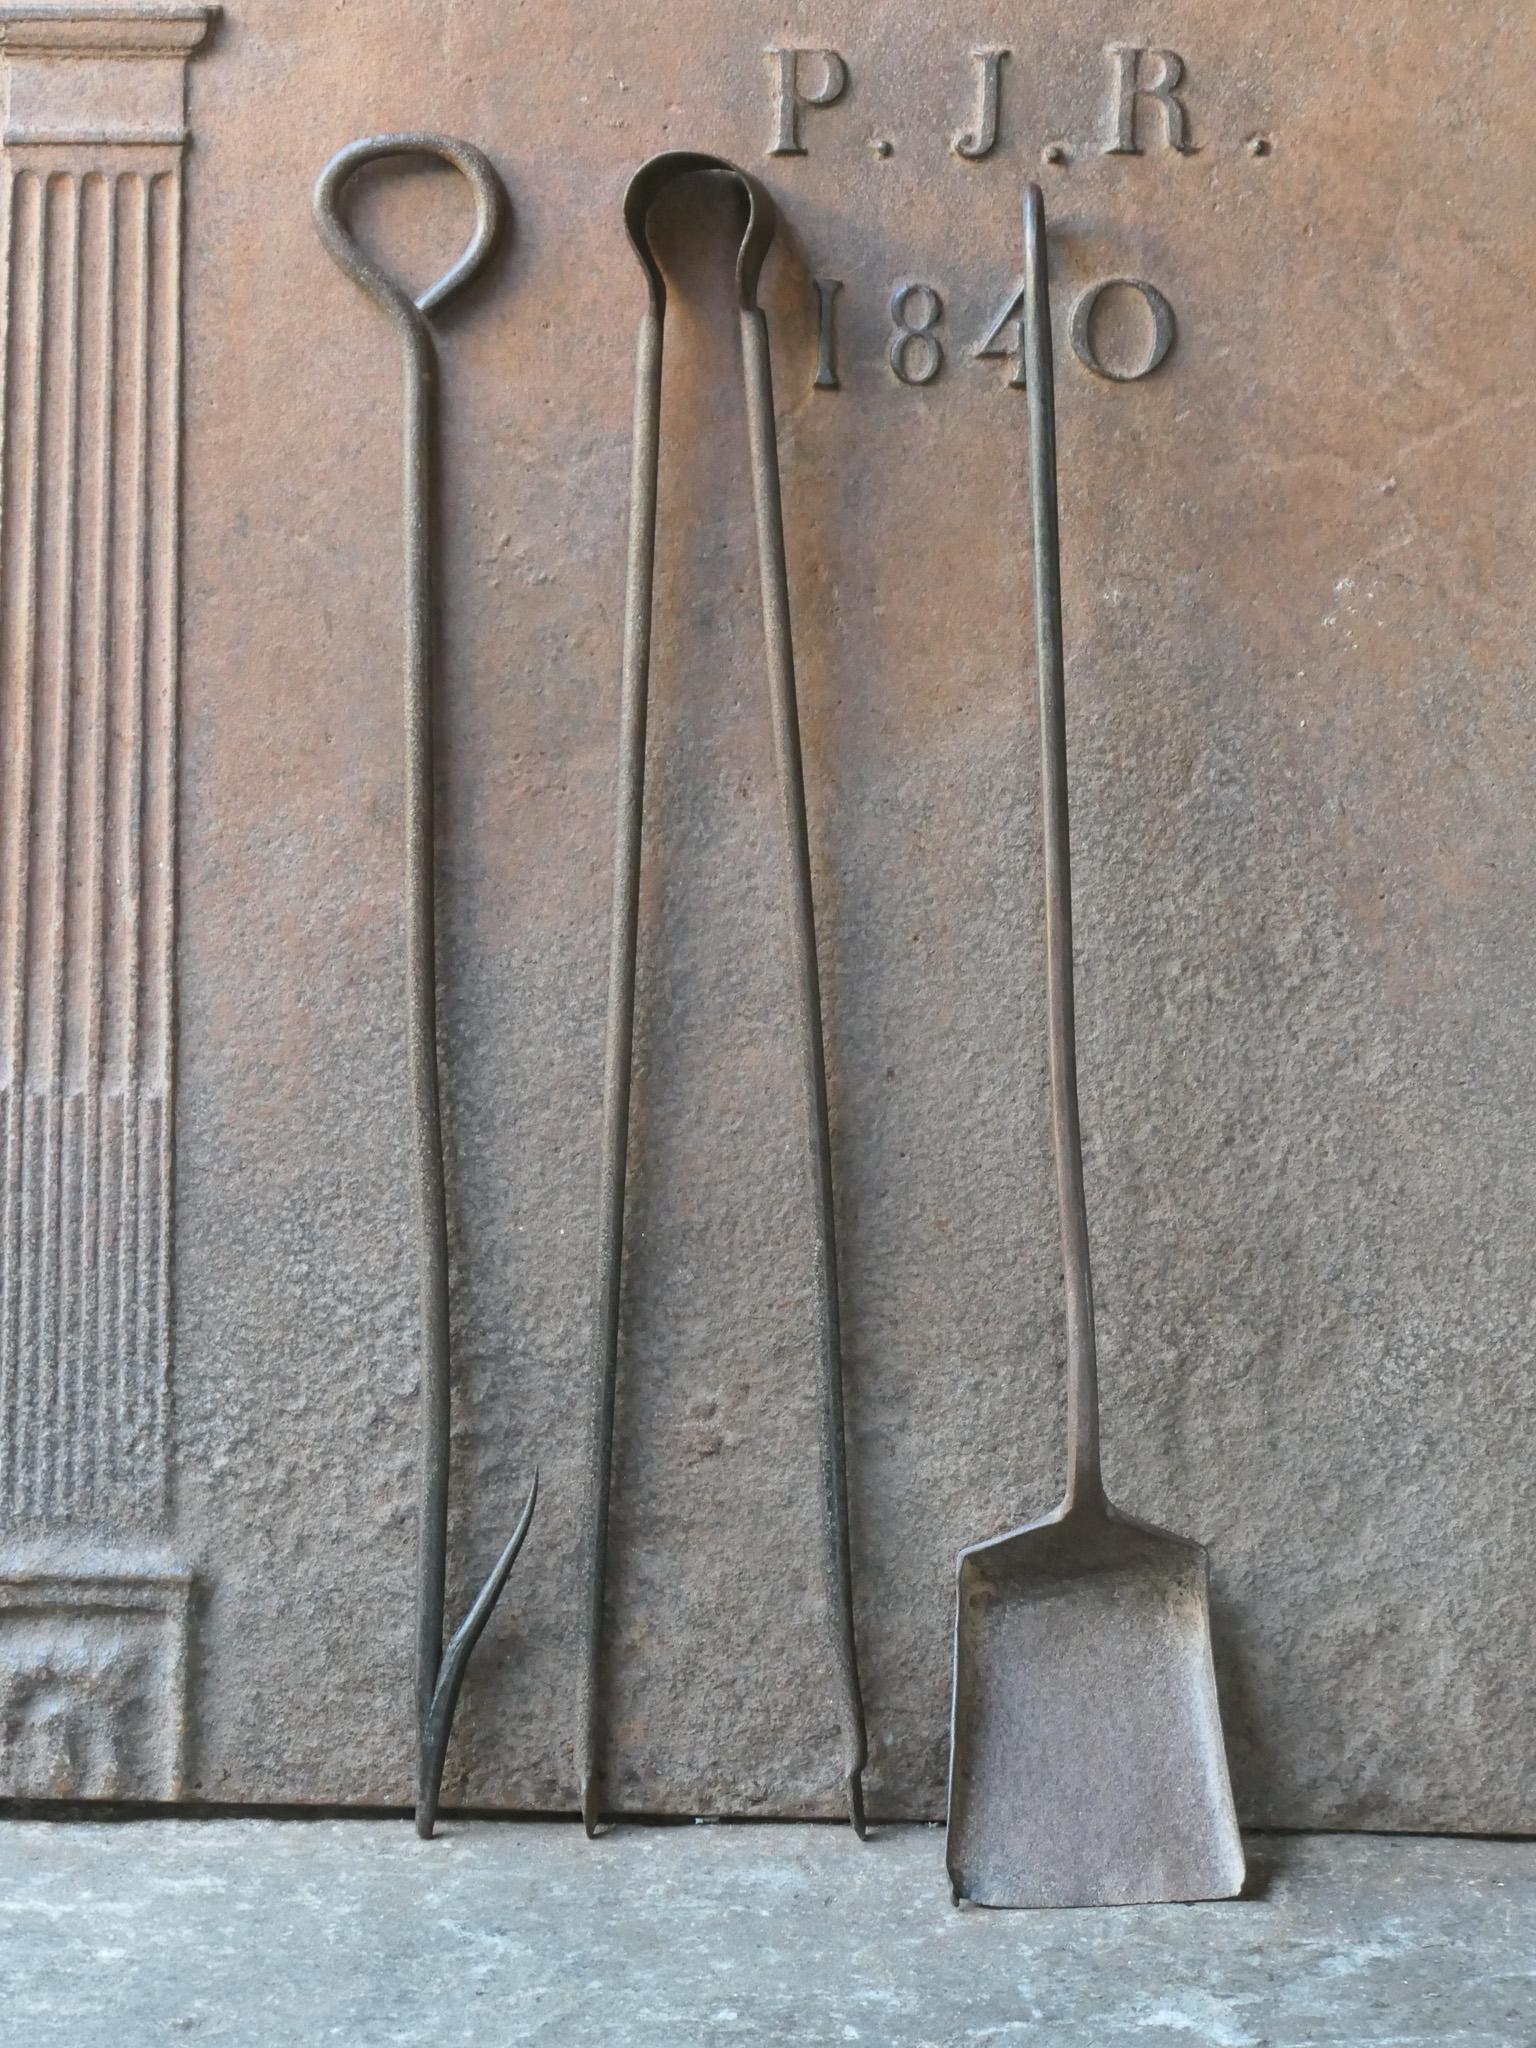 Rustic 18th-19th century French fireplace tool set. The tool set consists of fireplace tongs, shovel and a fire poker. The tools are made of wrought iron. The set is in a good condition and fit for use in the fireplace.